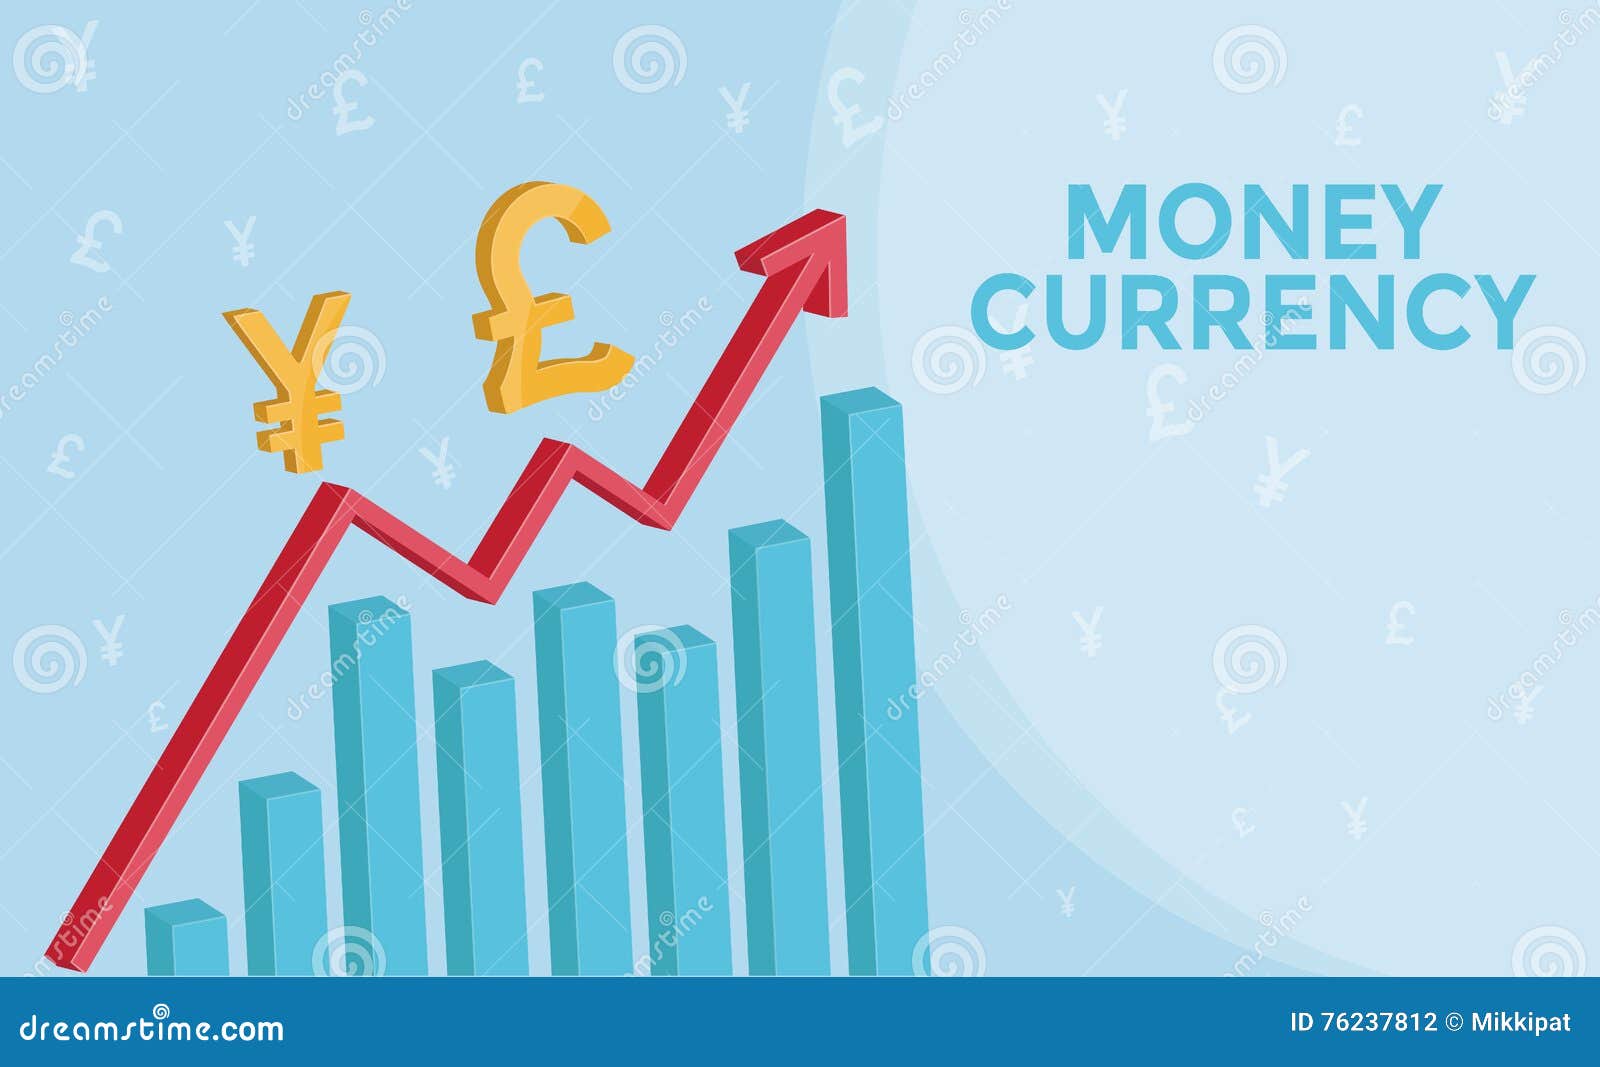 Foreign Exchange Market Info Graphic With 3d Arrow Pound Symbol - 